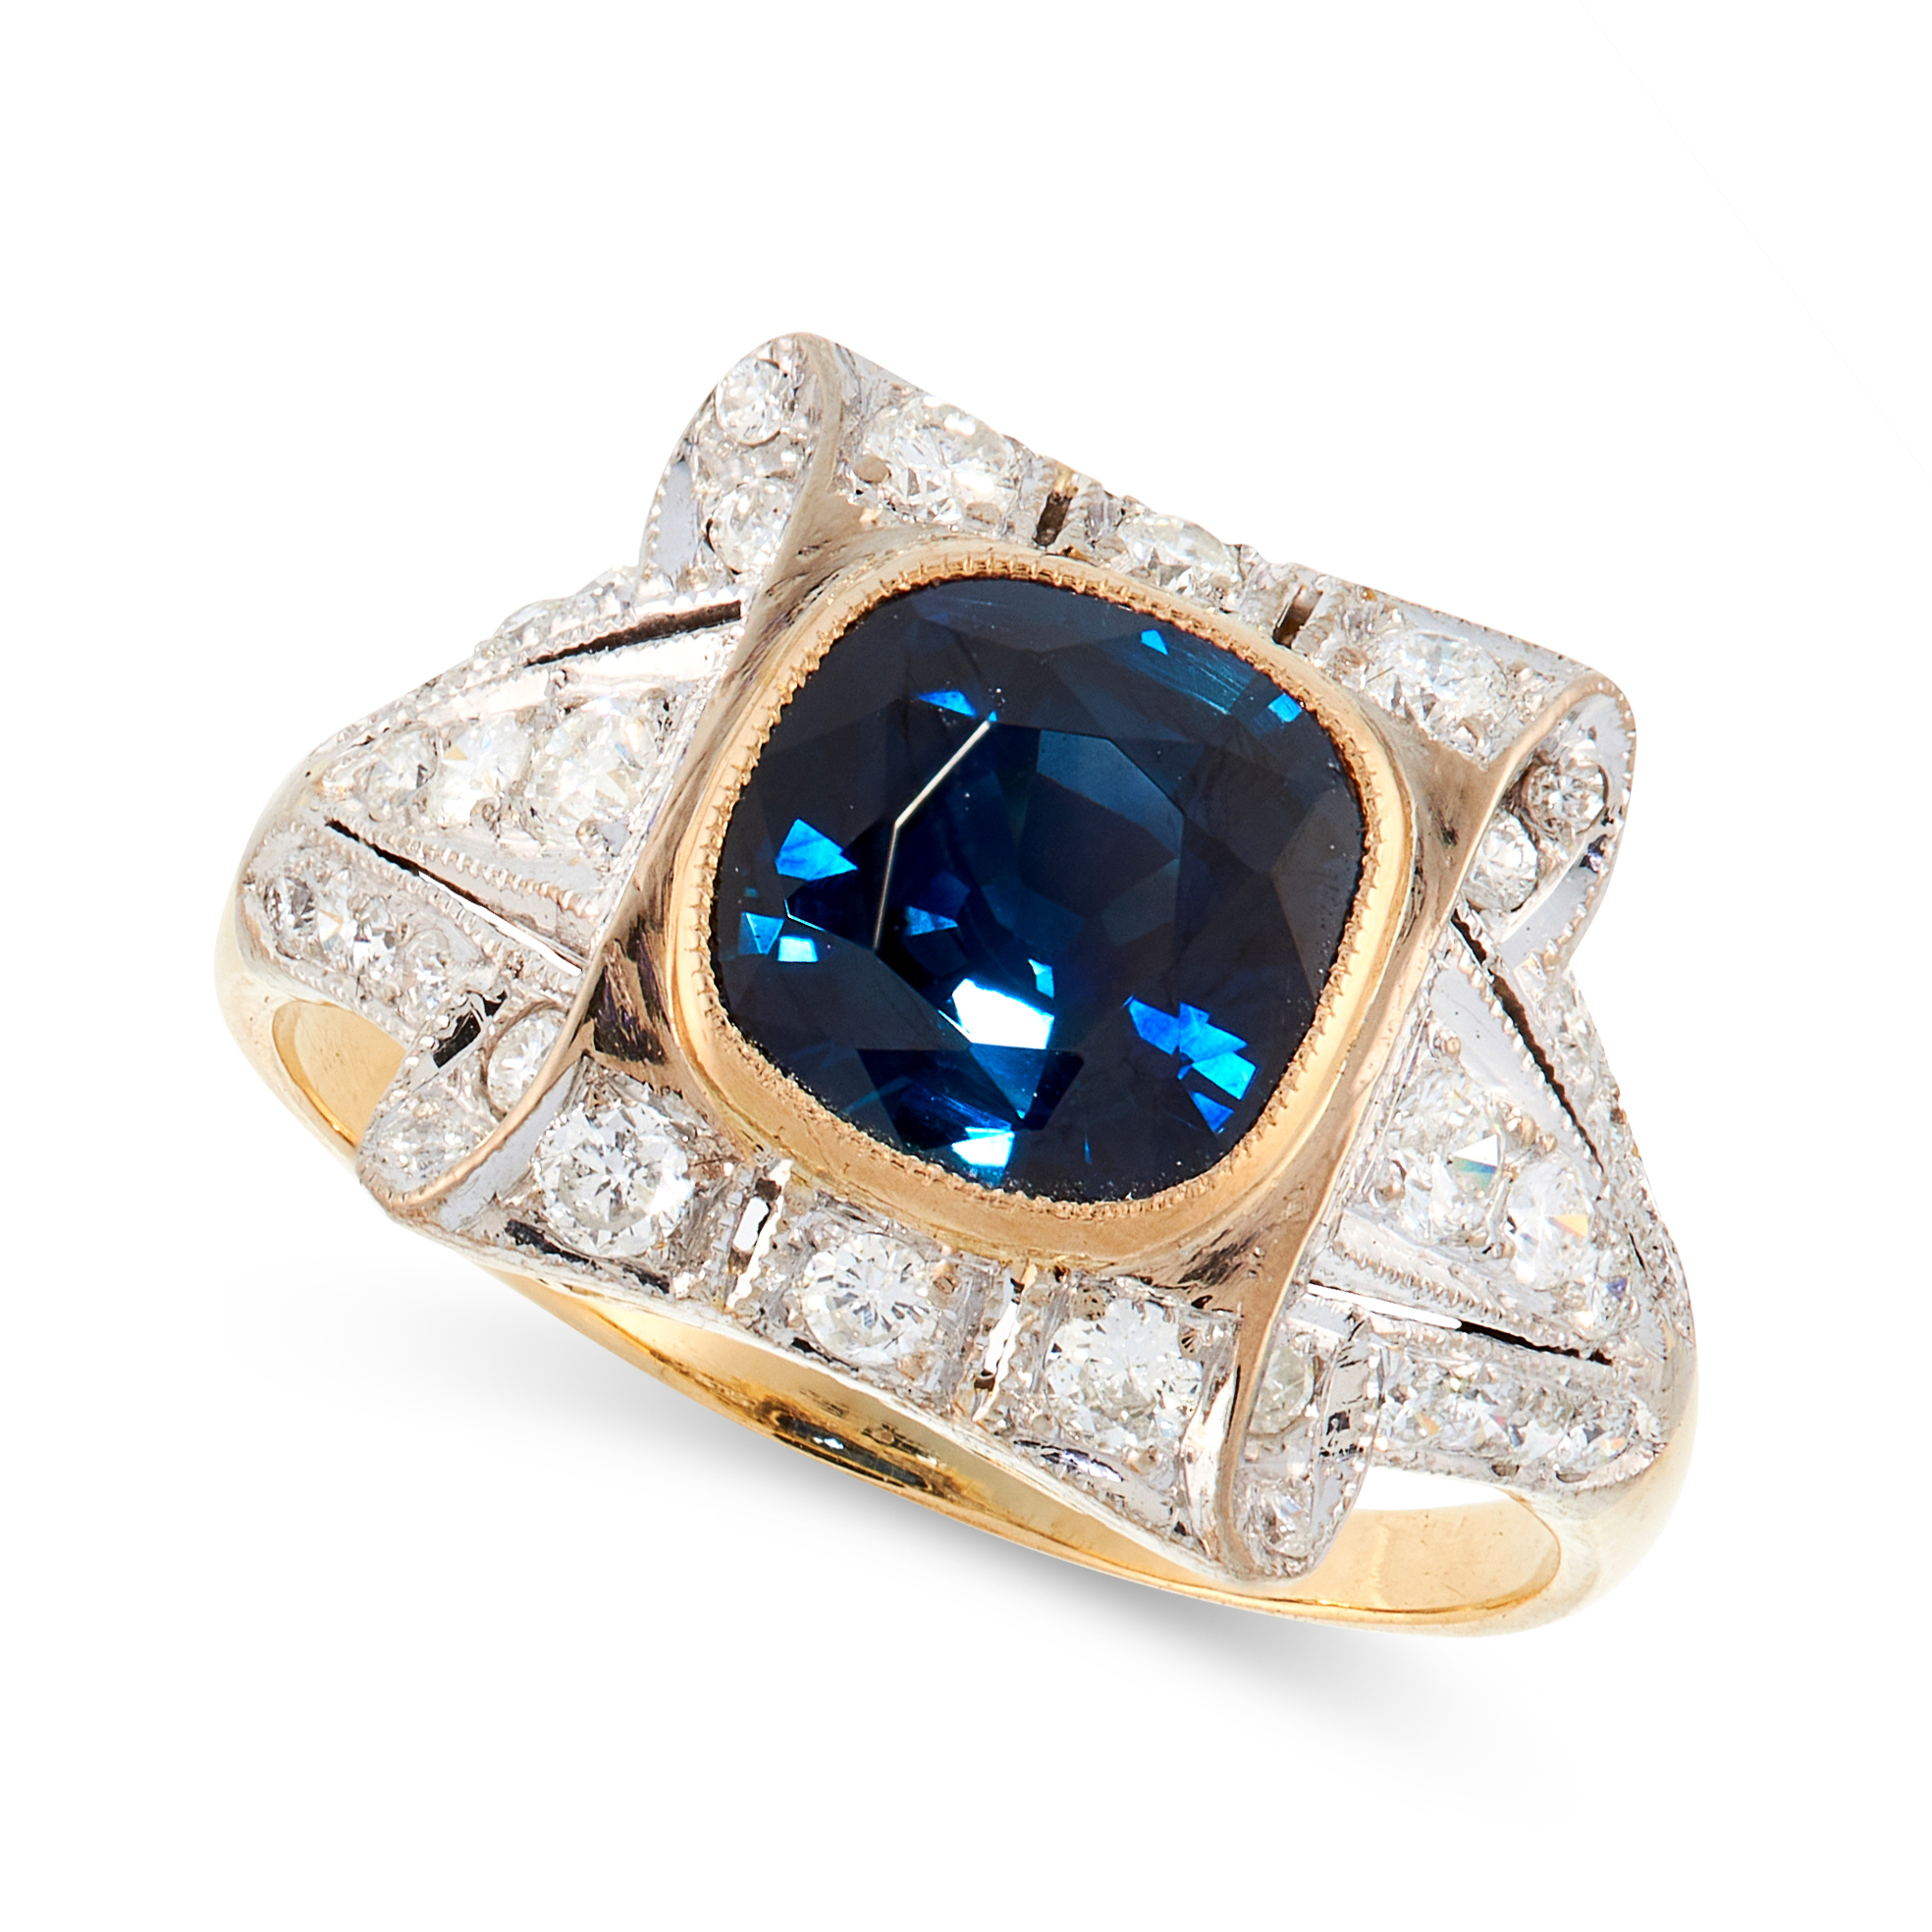 A SAPPHIRE AND DIAMOND DRESS RING, CIRCA 1950 set with a cushion cut blue sapphire of 1.96 carats,